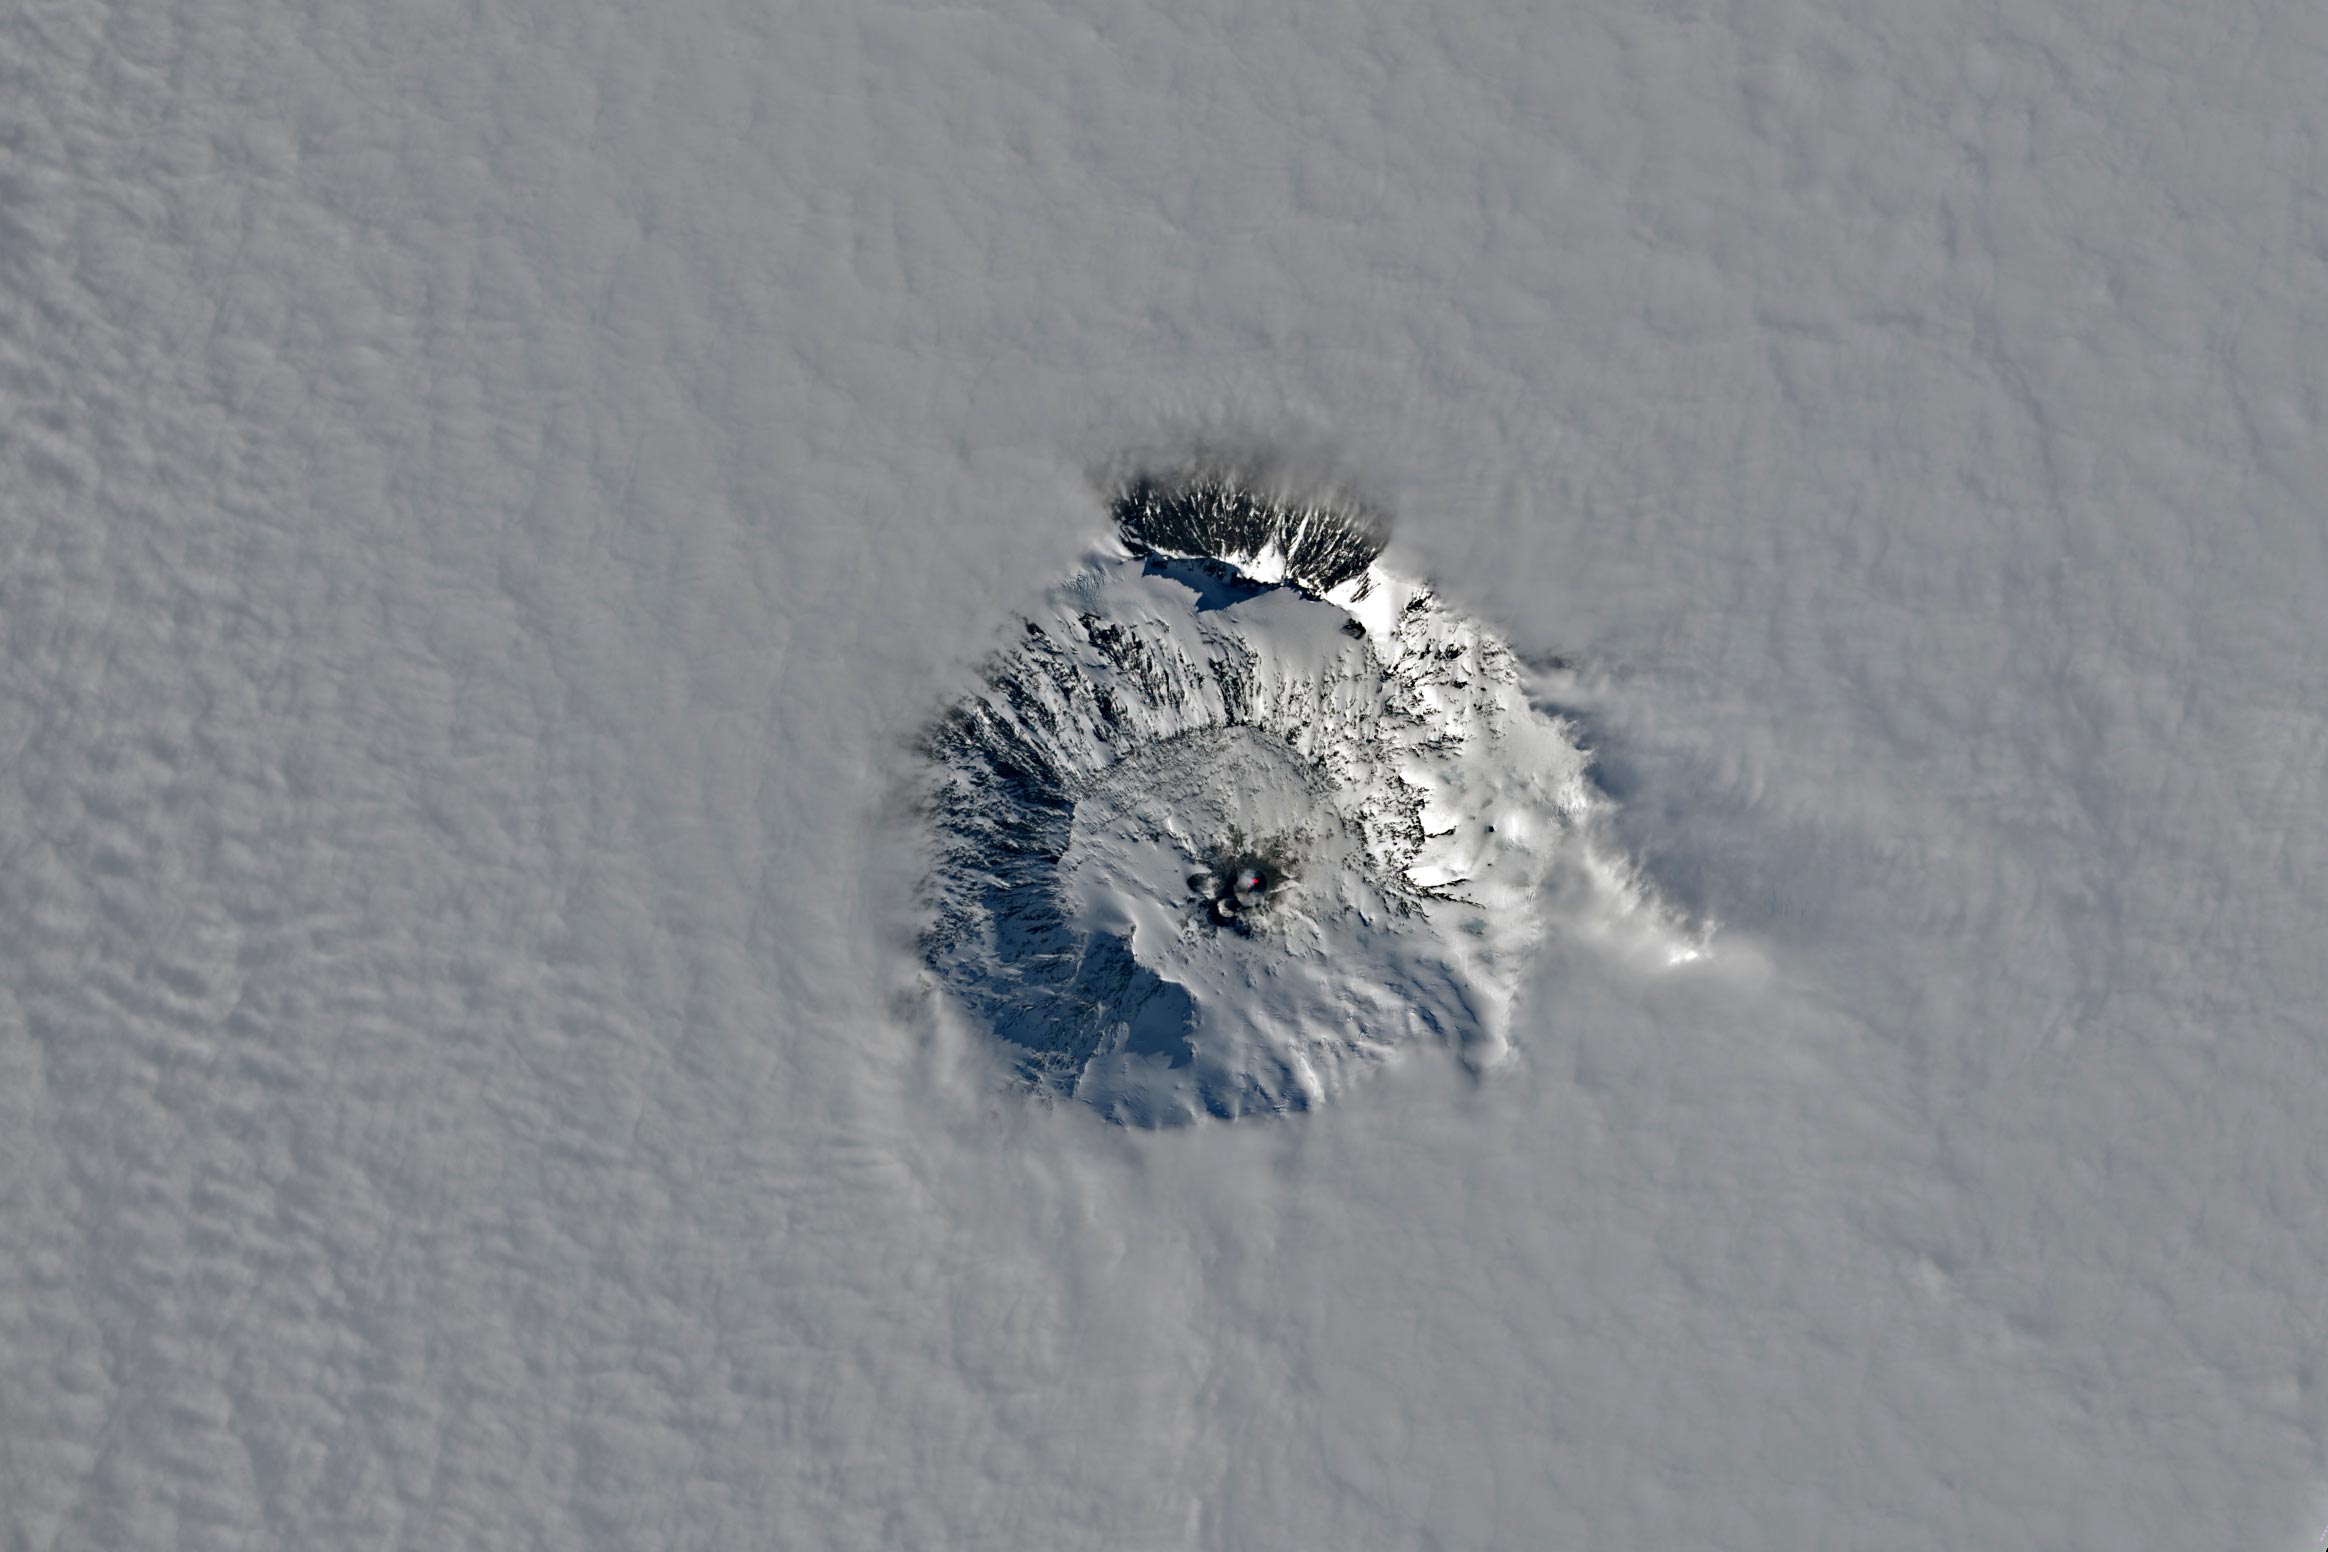 Mount Erebus’ Dramatic Emergence From the Antarctic Clouds